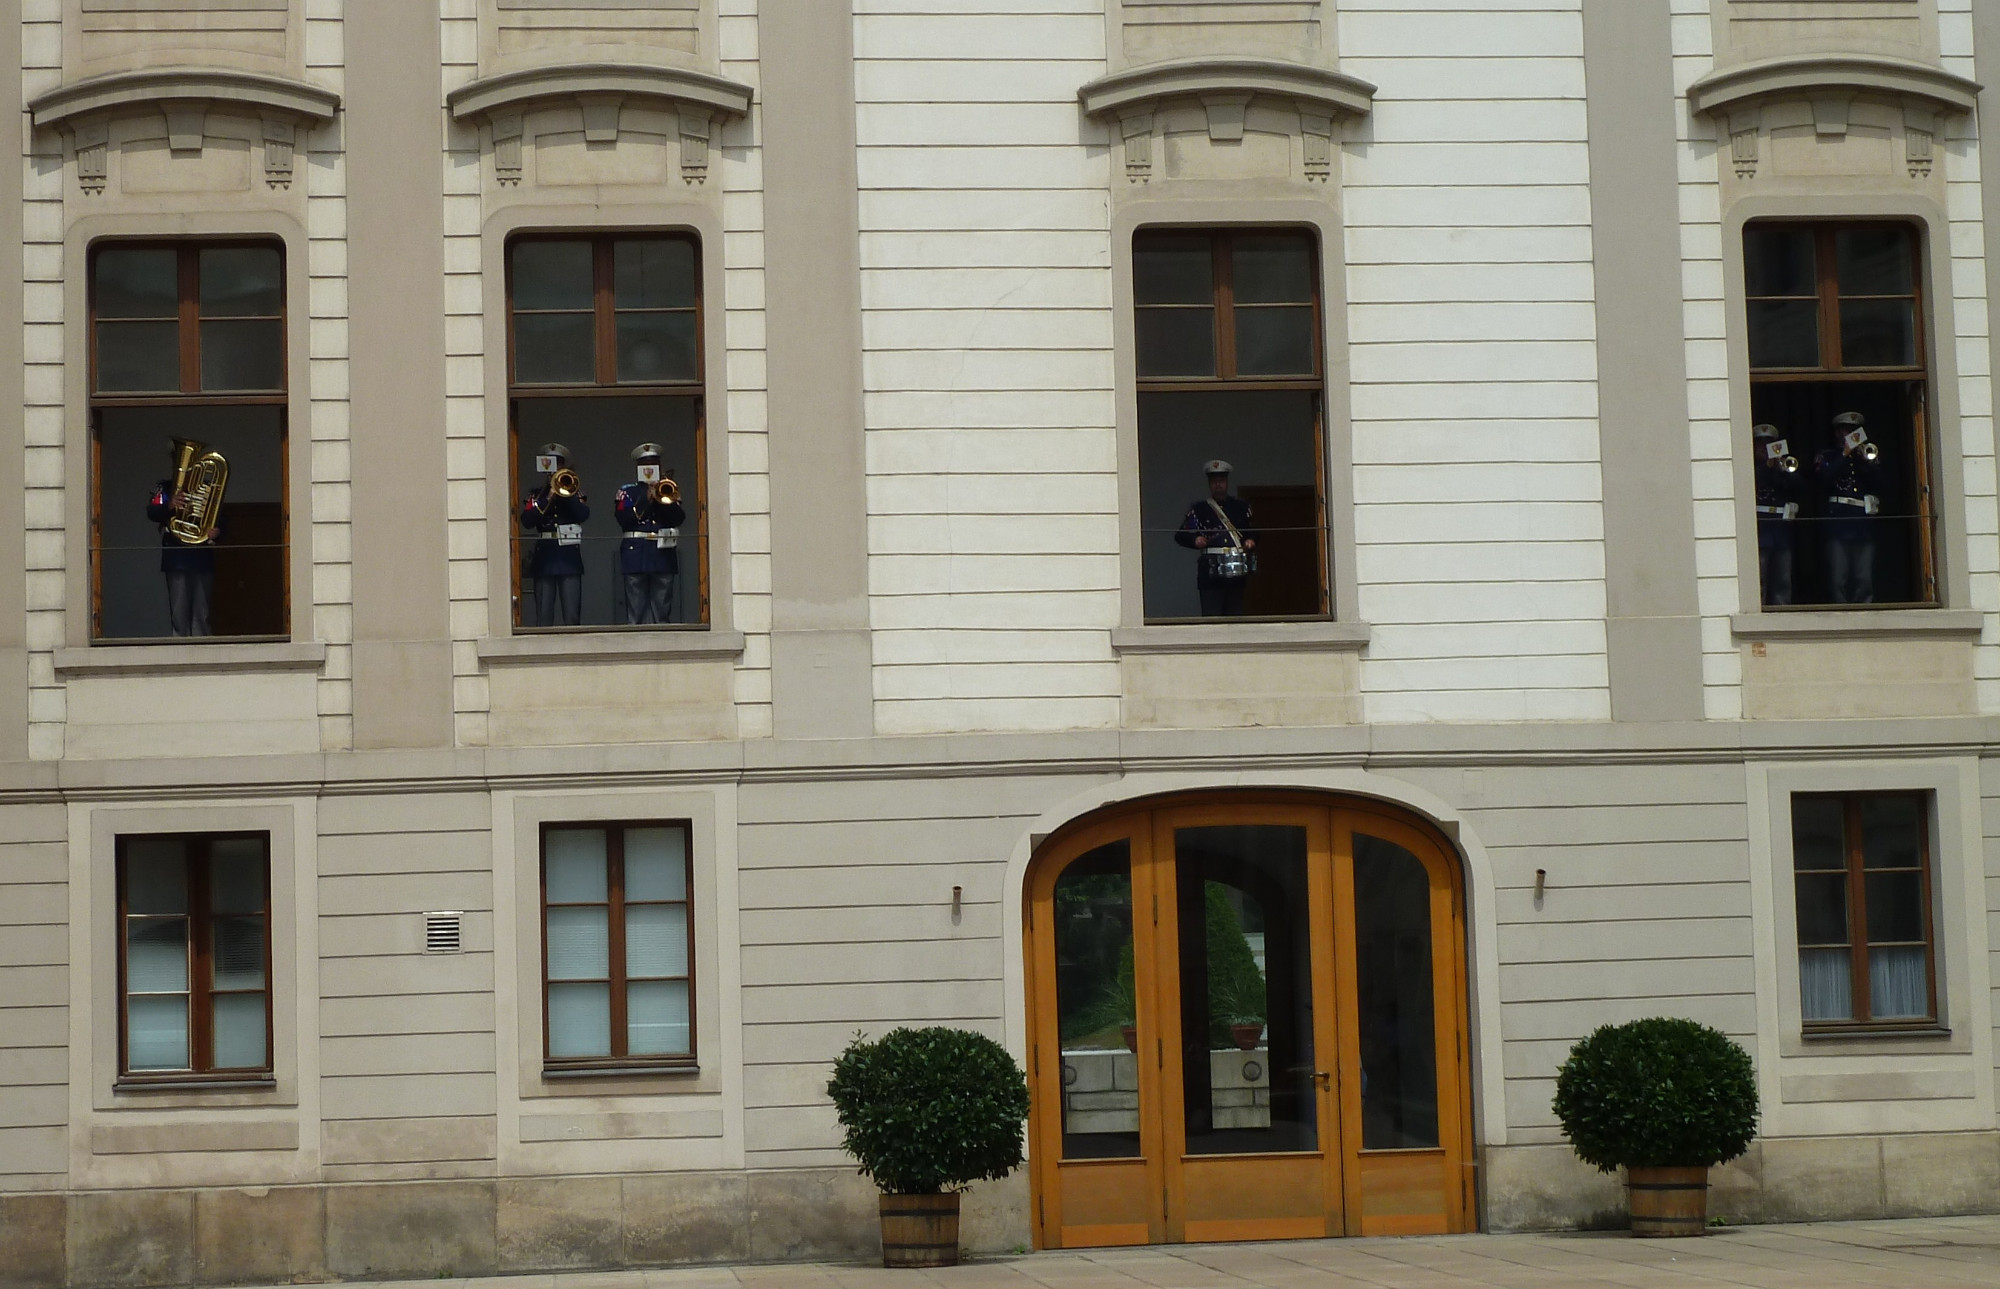 band members playing through Palace windows at Changing of the Guard